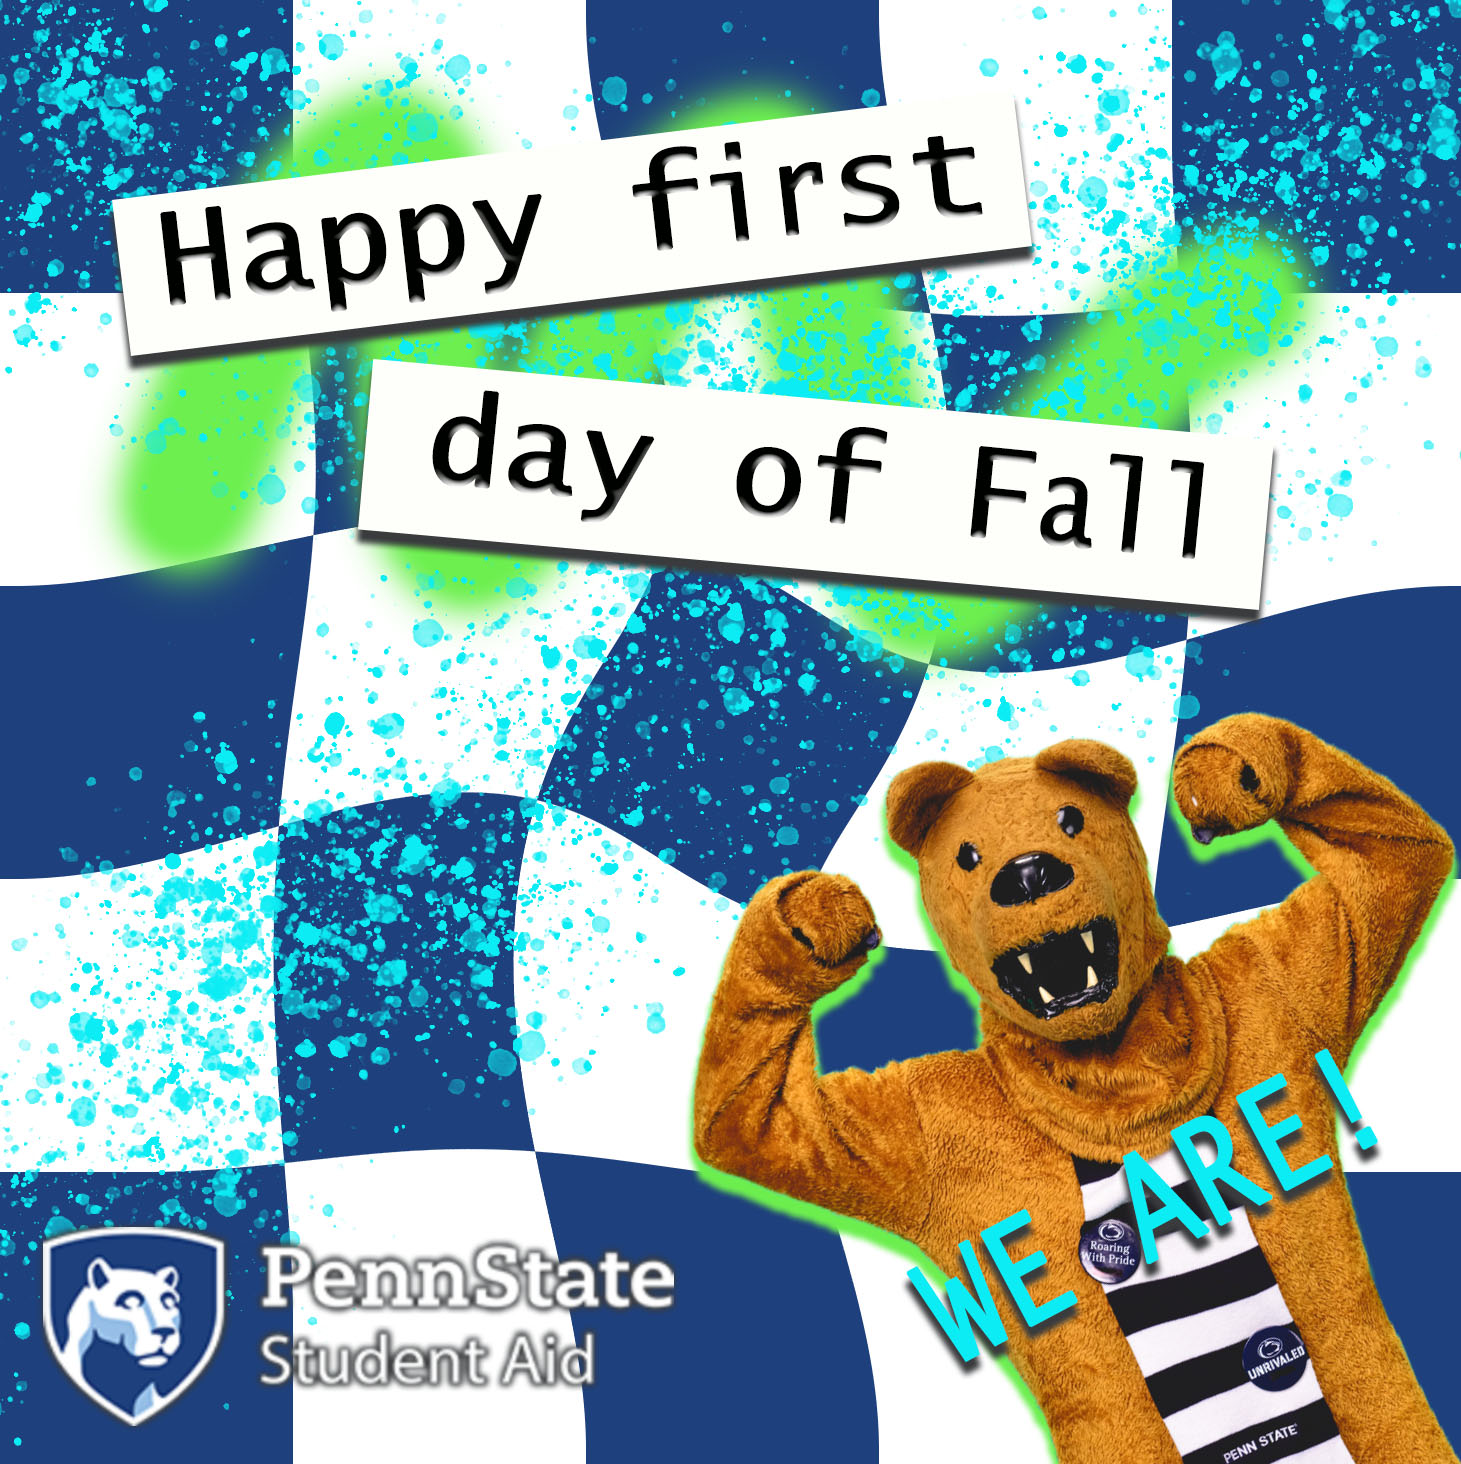 Nittany Lion with welcome message.